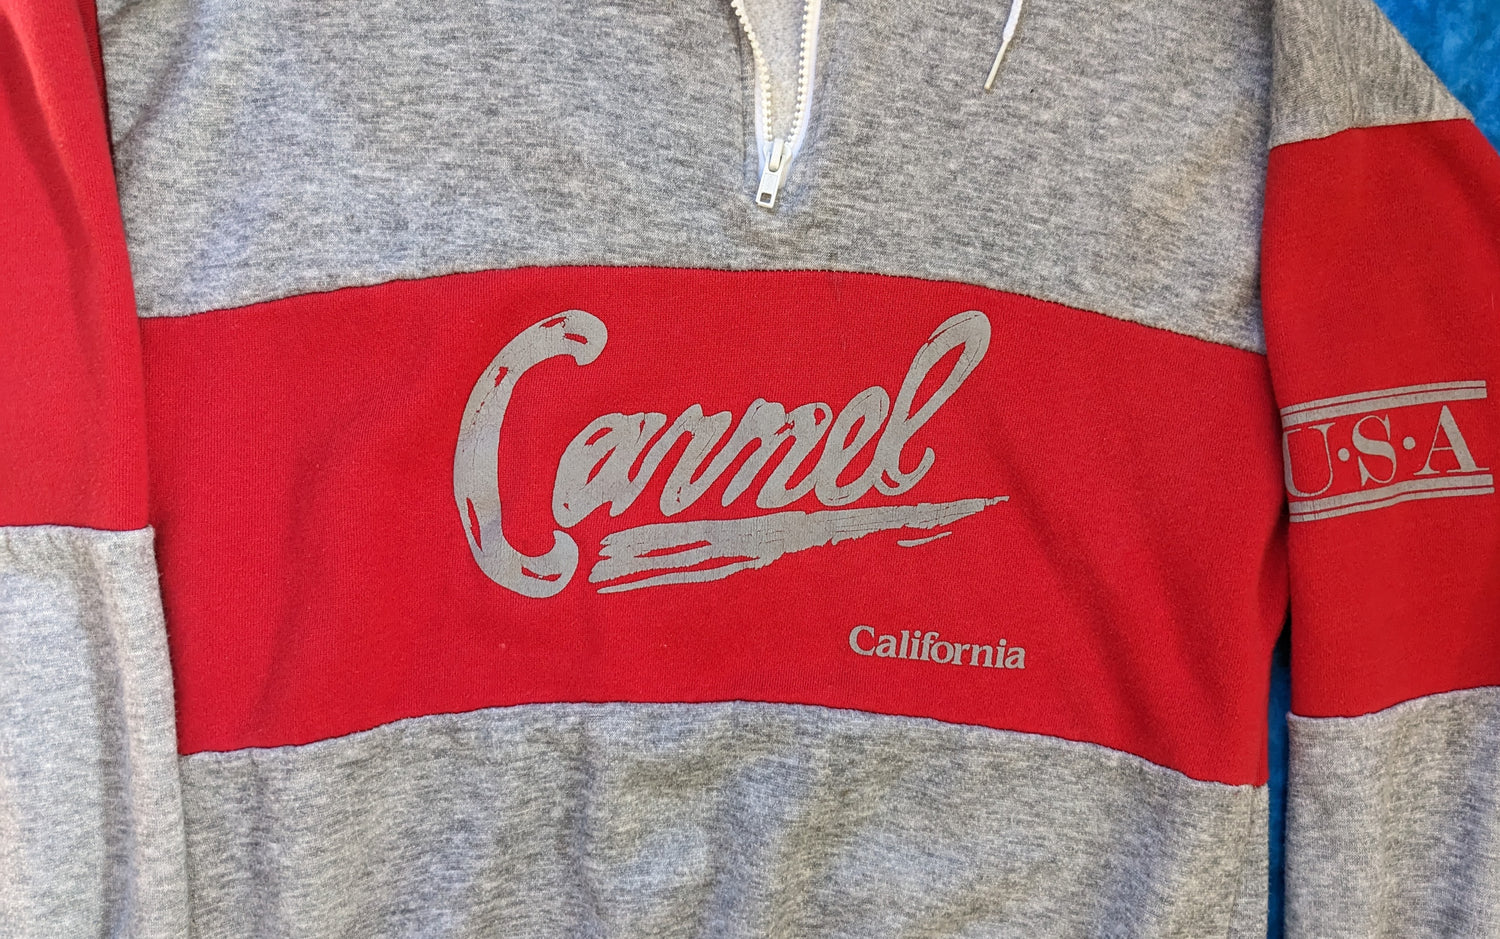 Red and gray Carmel USA pullover details